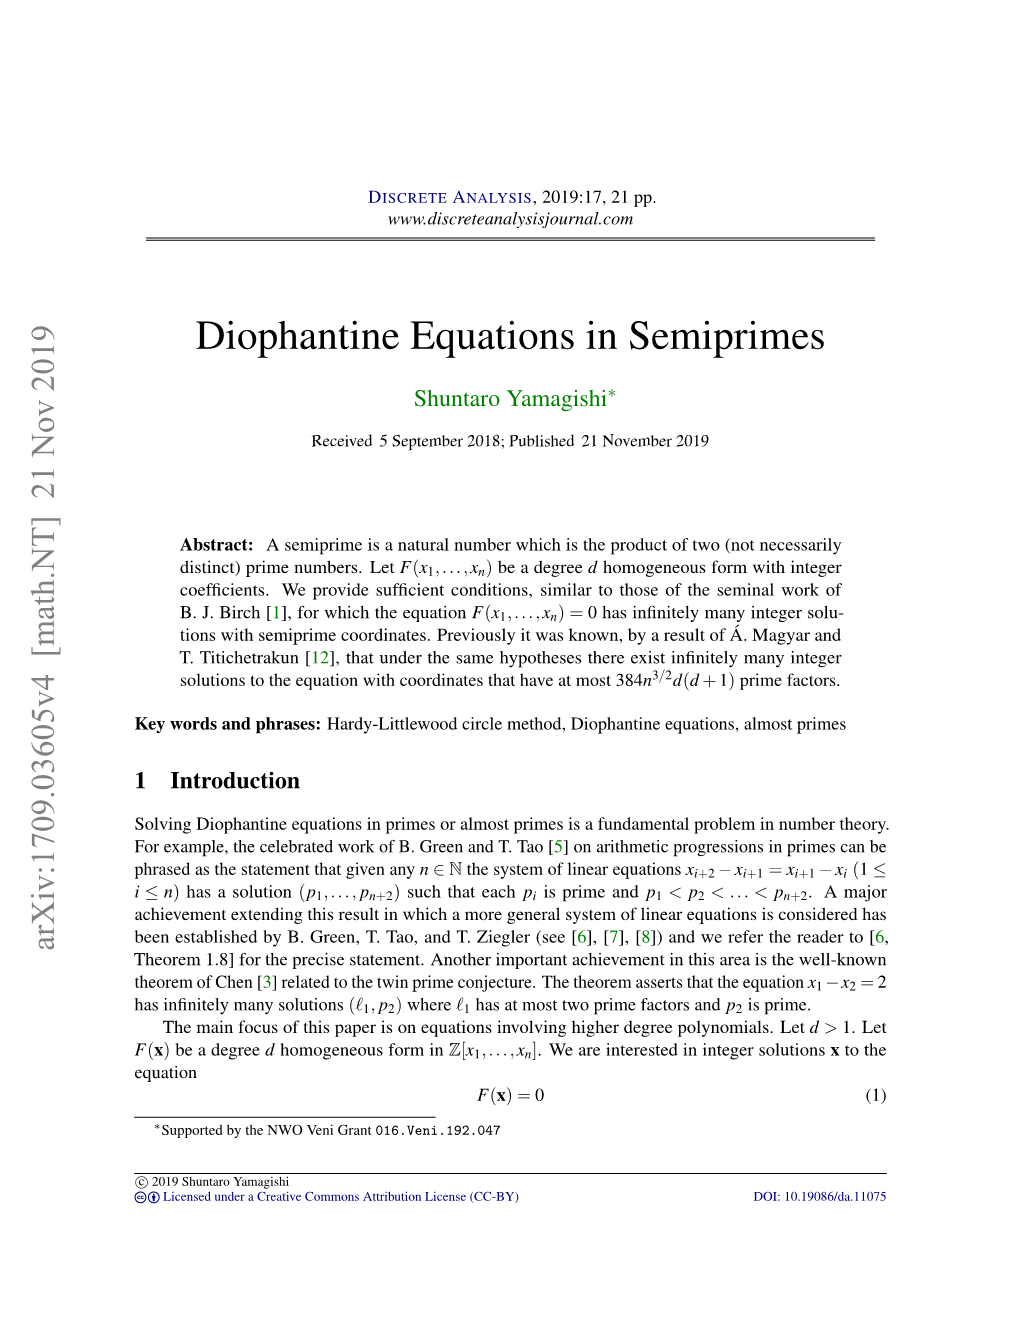 Diophantine Equations in Semiprimes